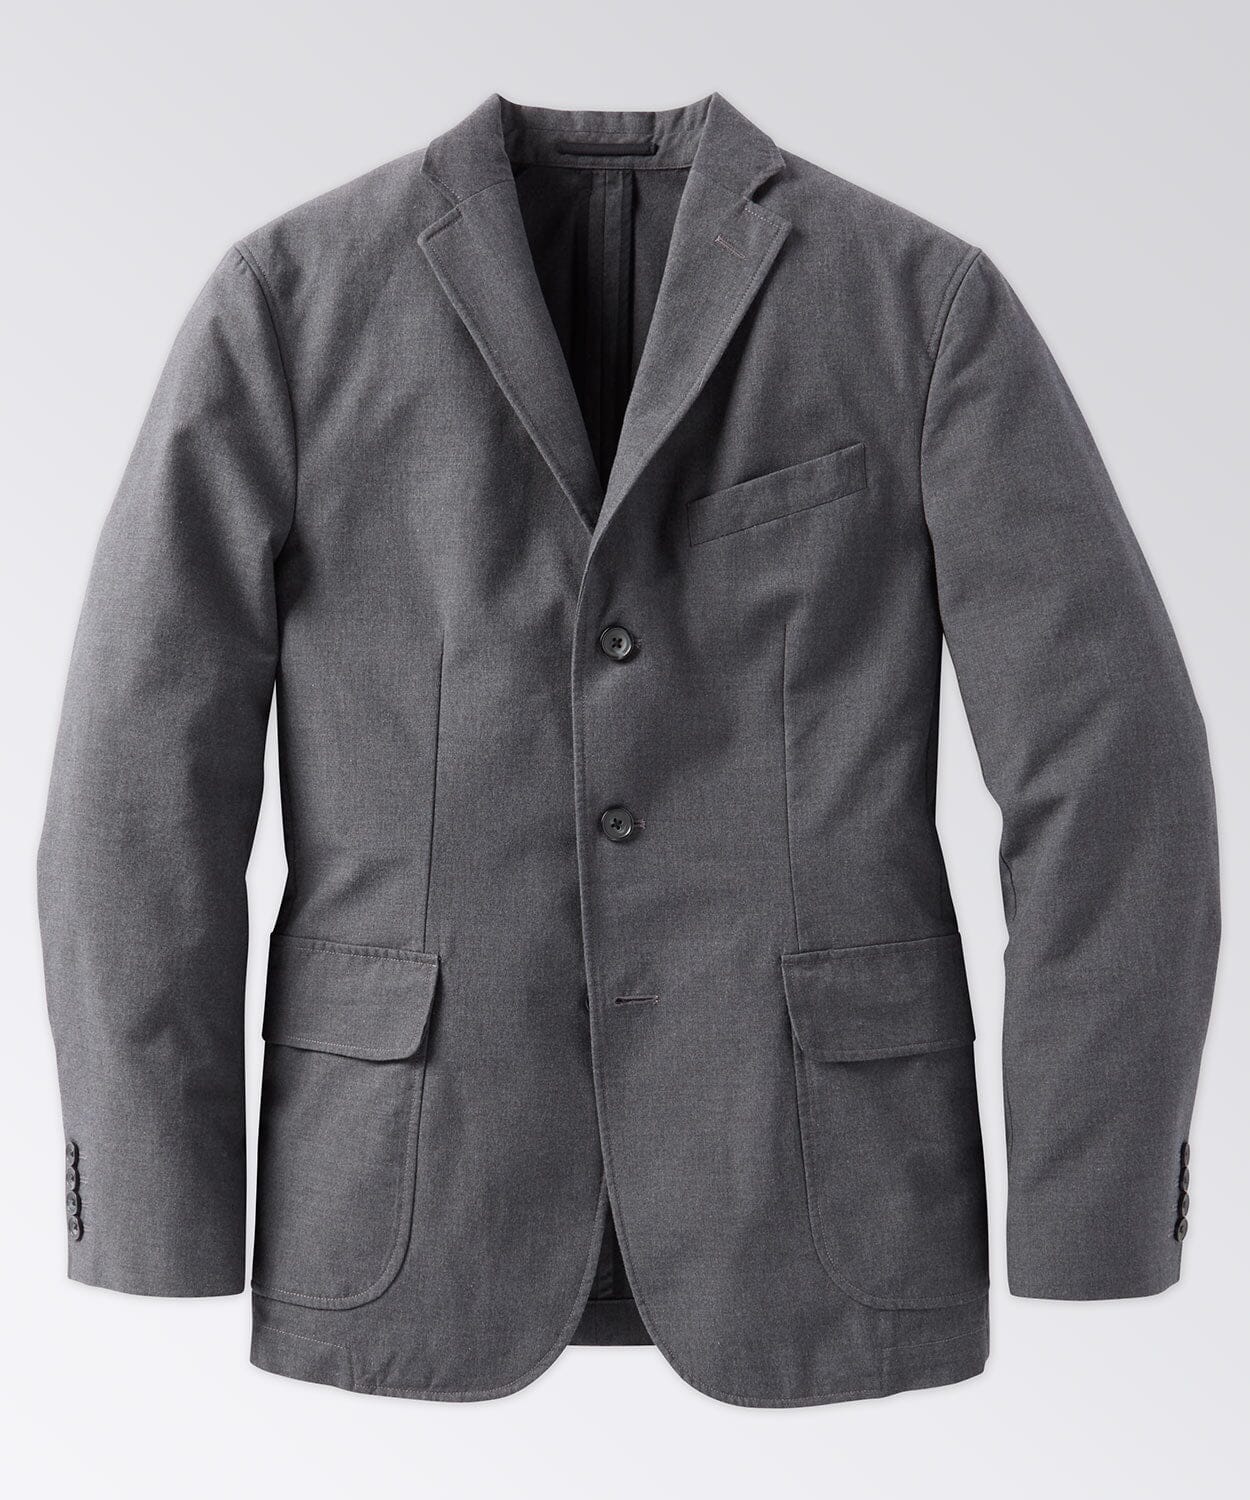 Blazer, Sport Coat, Suit Coat—what's The Difference?, 44% OFF